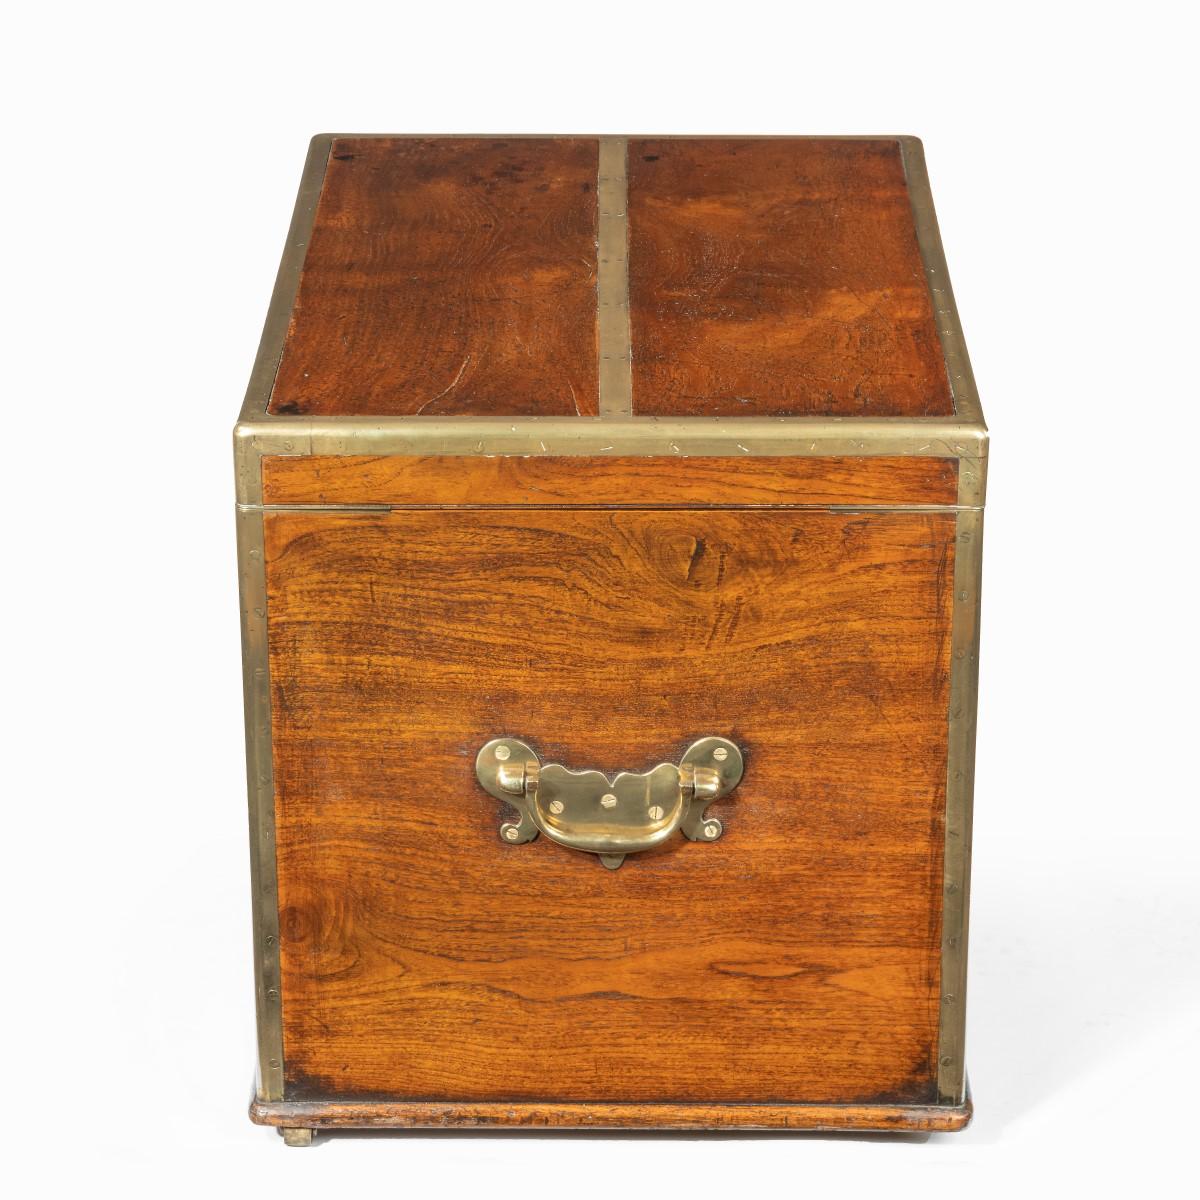 A very robust brassbound William IV Anglo-Chinese padouk silver chest, of rectangular form with a hinged lid and the original substantial brass carrying handles, the lock stamped ‘Barron WR Patent’. Circa 1830.

Footnote: In 1778 Robert Barron